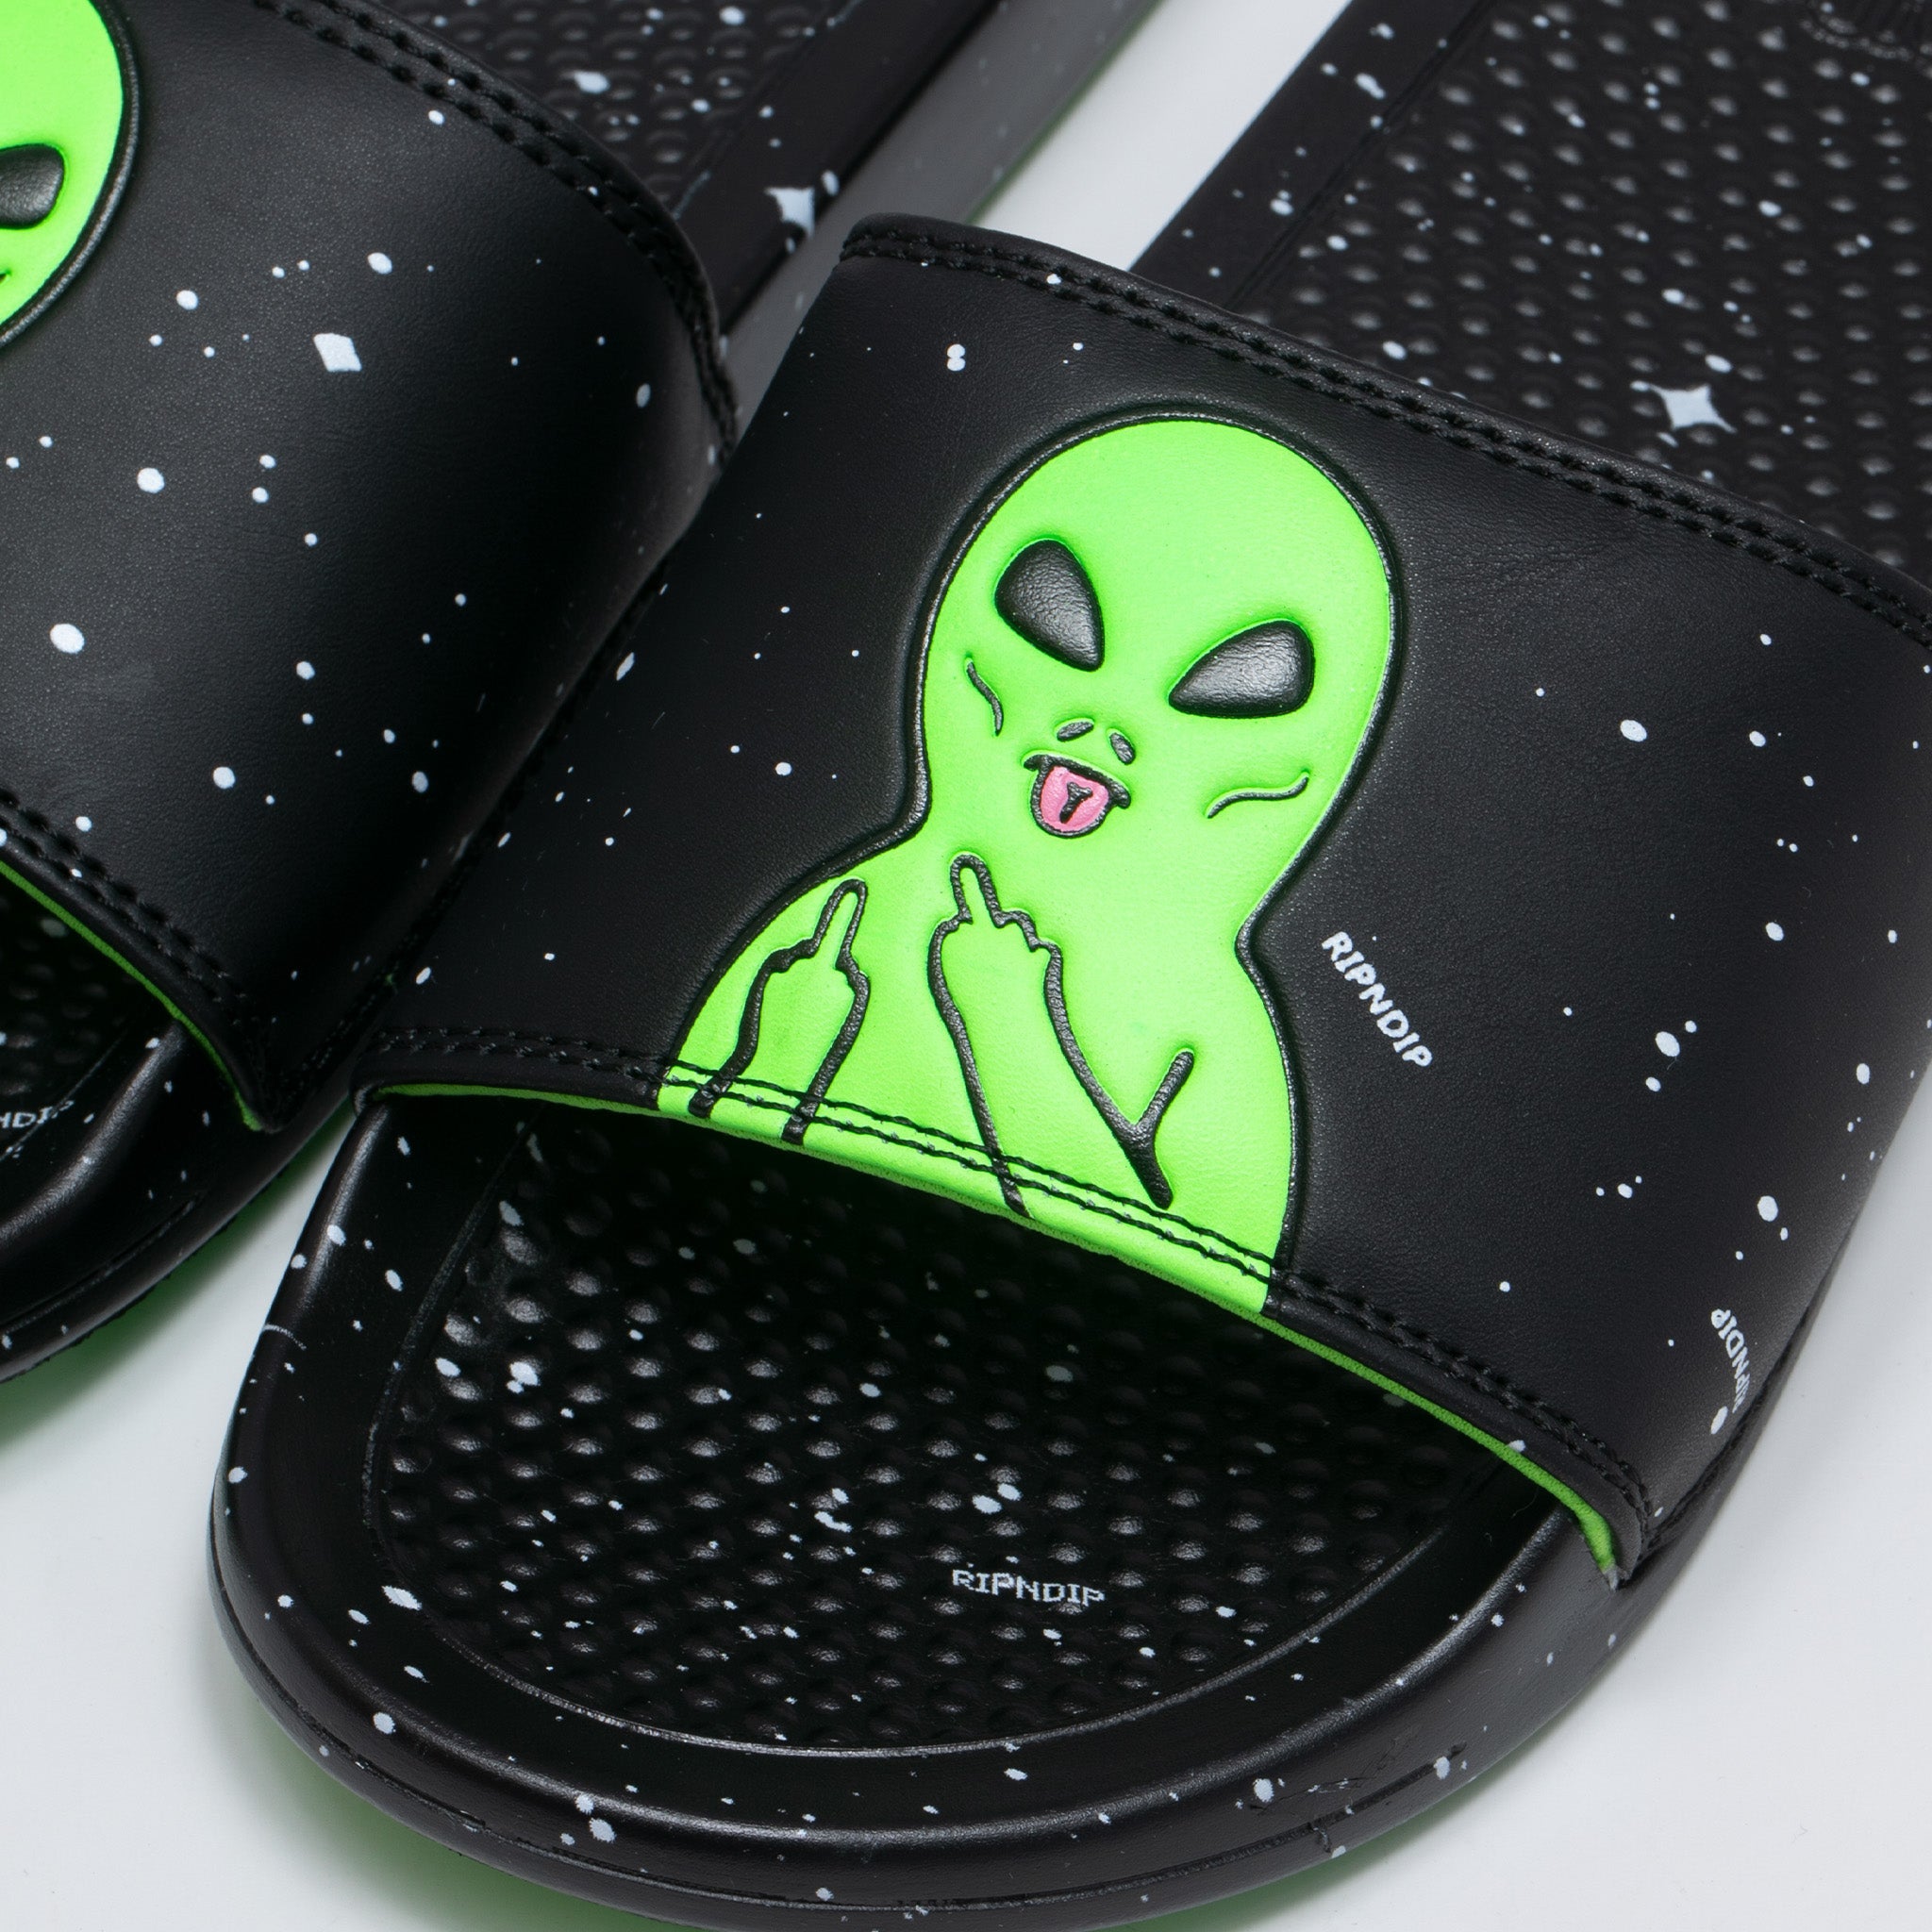 We Out Here Slides (Black/Neon Green)